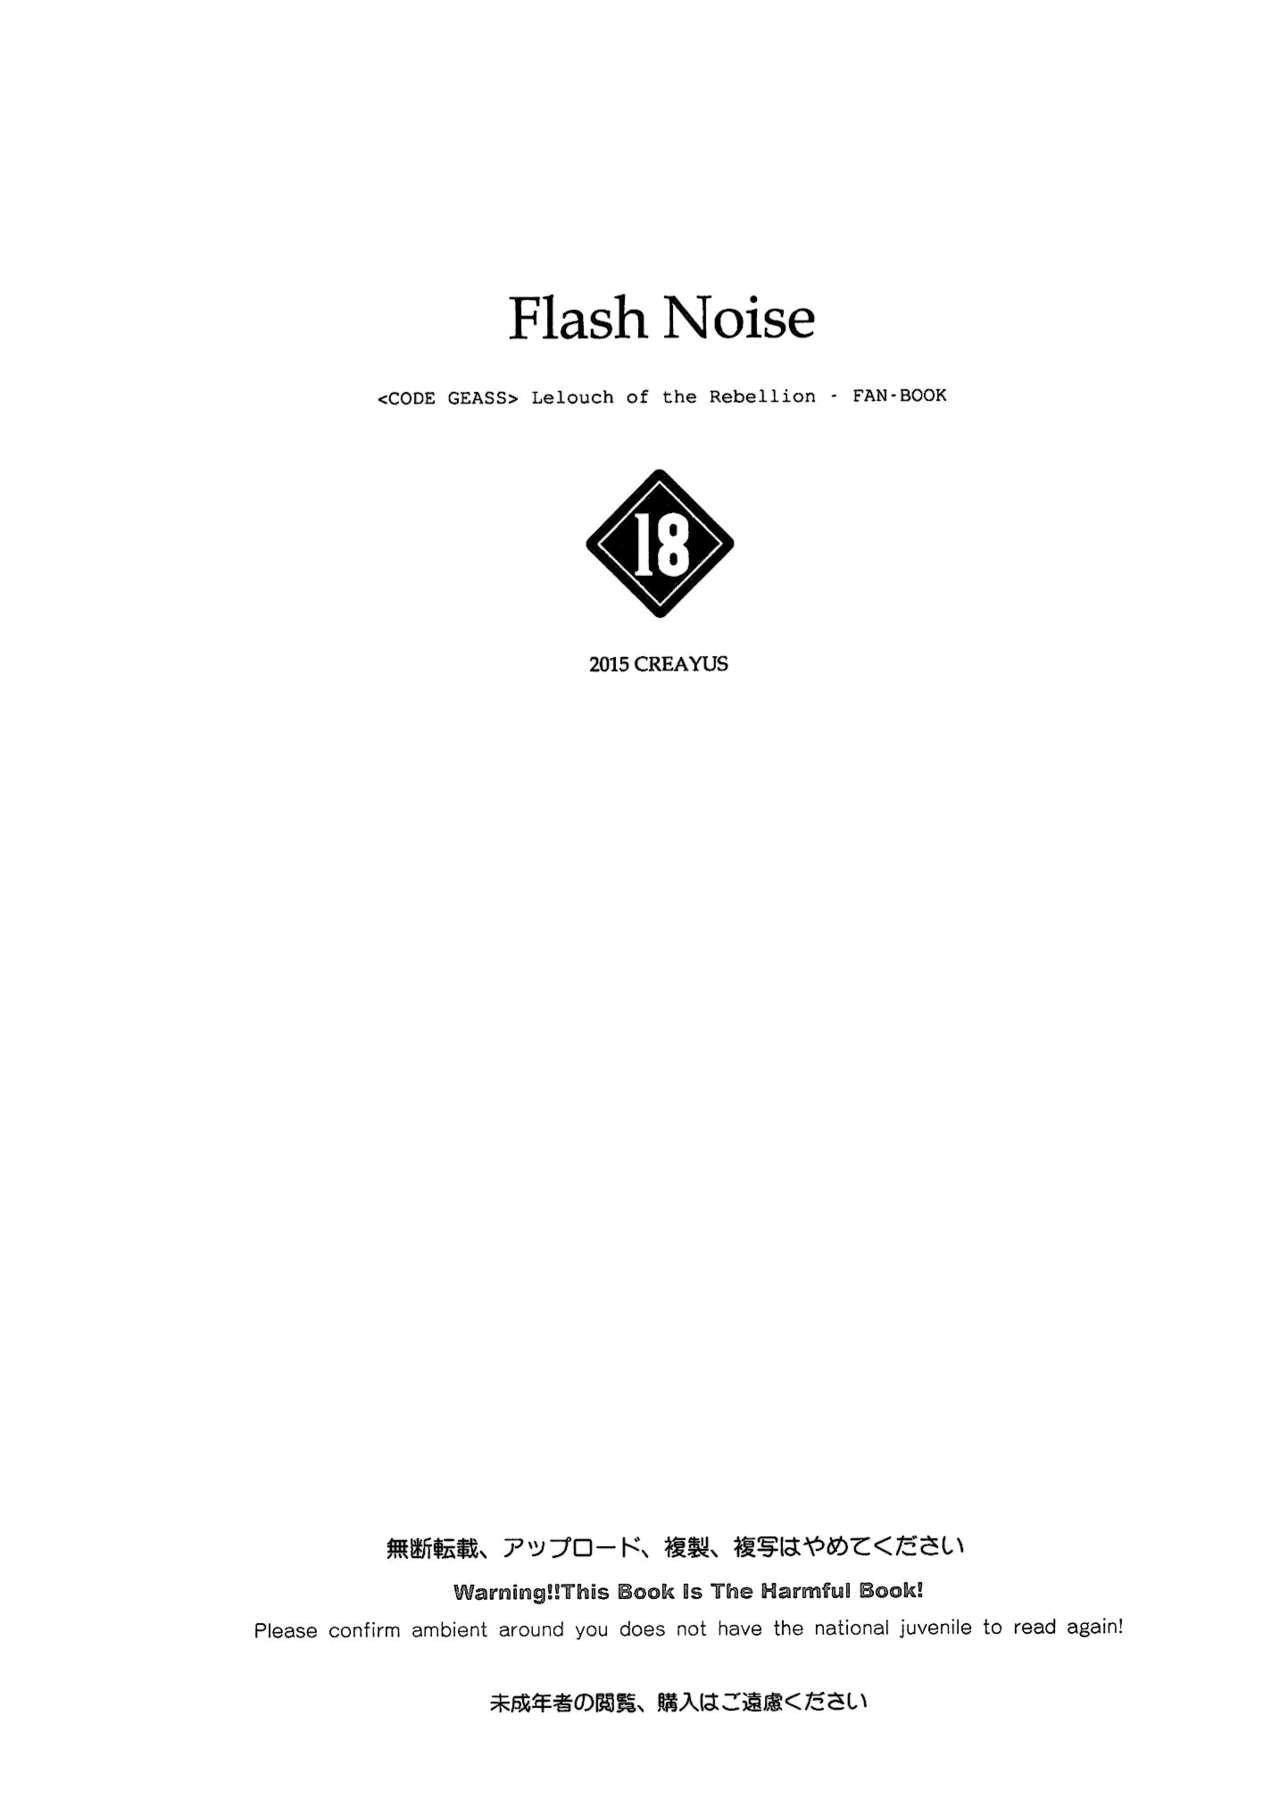 Sissy Flash Noise - Code geass Flagra - Picture 2